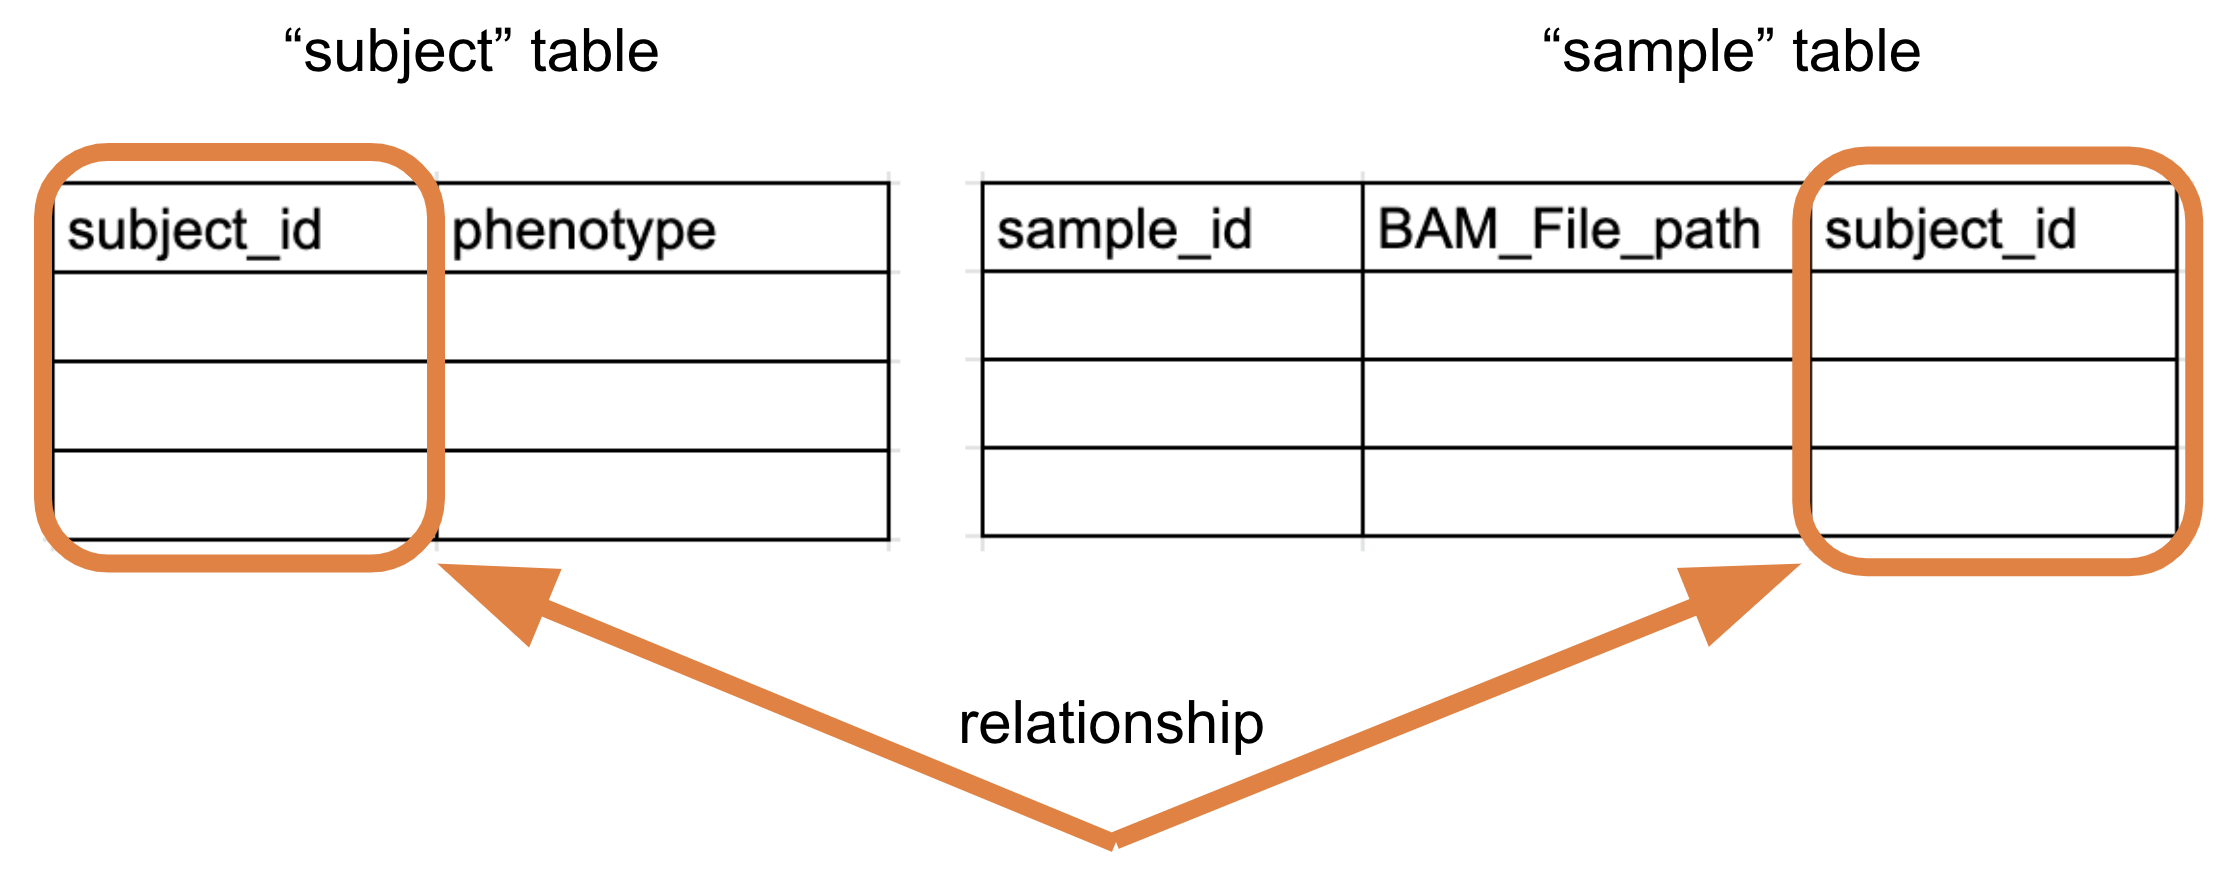 TDR_Relationship-between-subject-table-and-sample-table.png